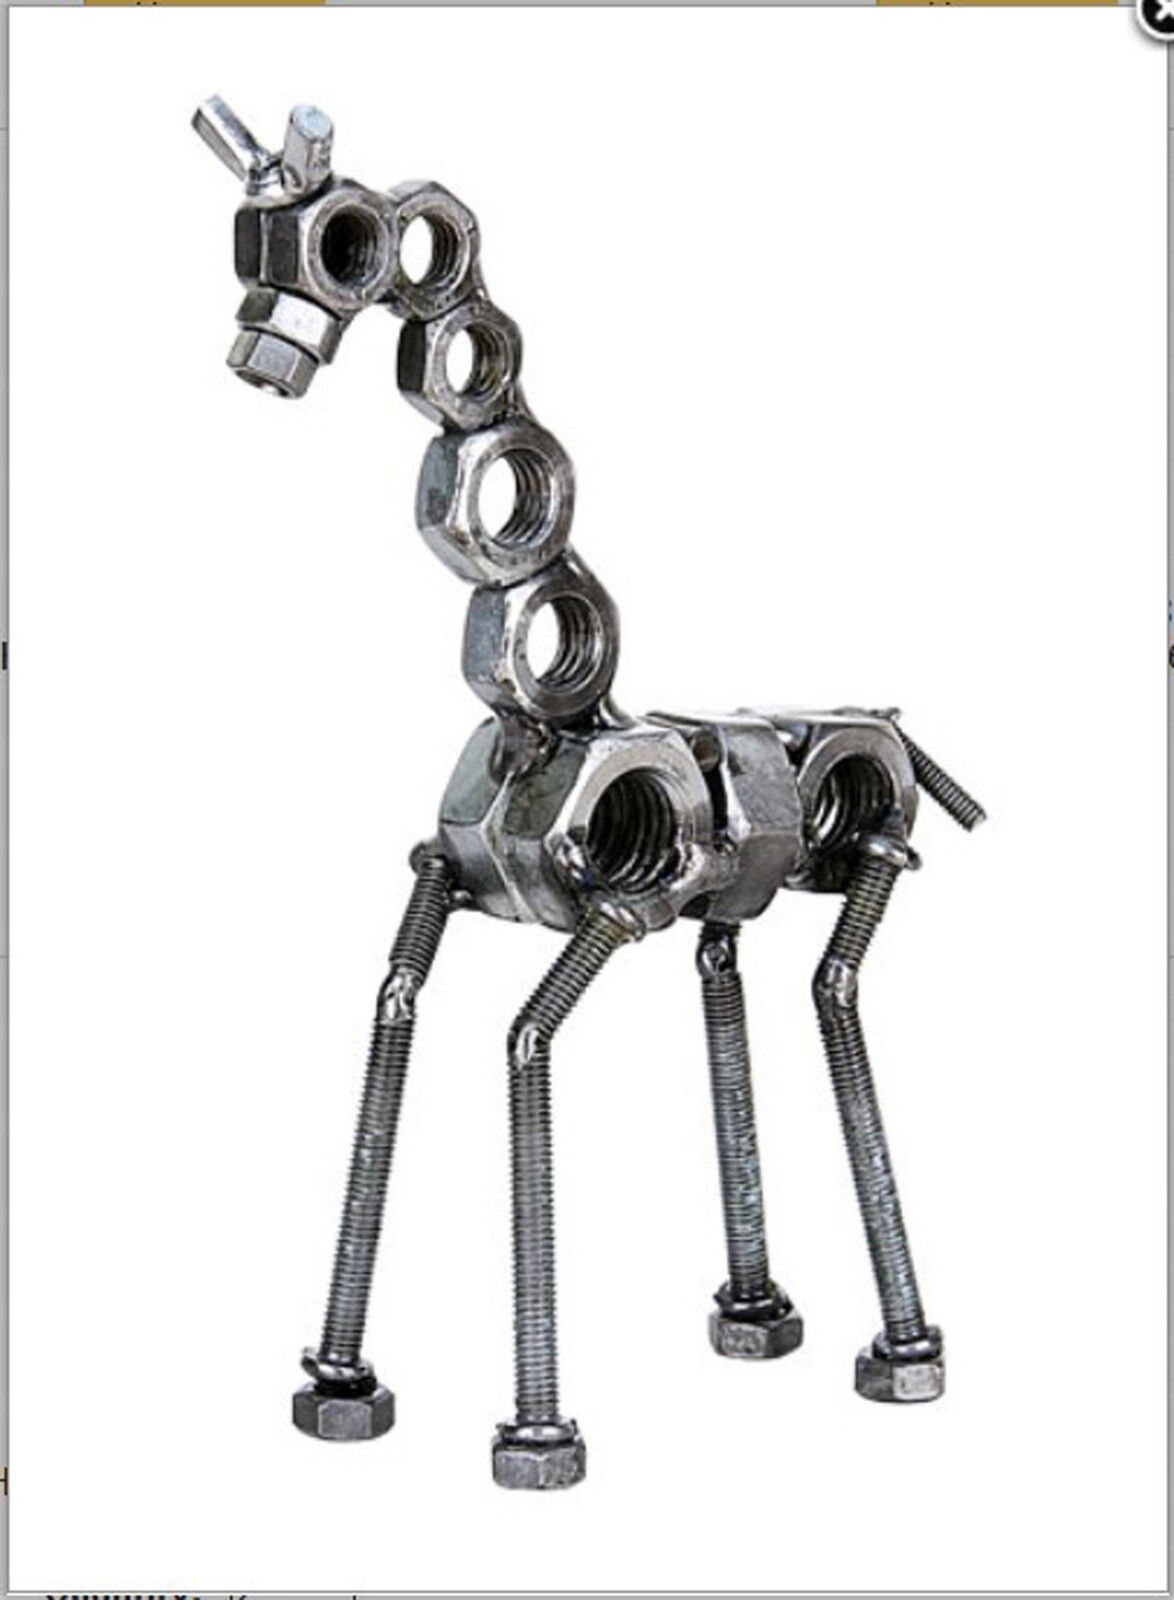 Baby Giraffe Hand Crafted Recycled Metal  Art Sculpture Figurine